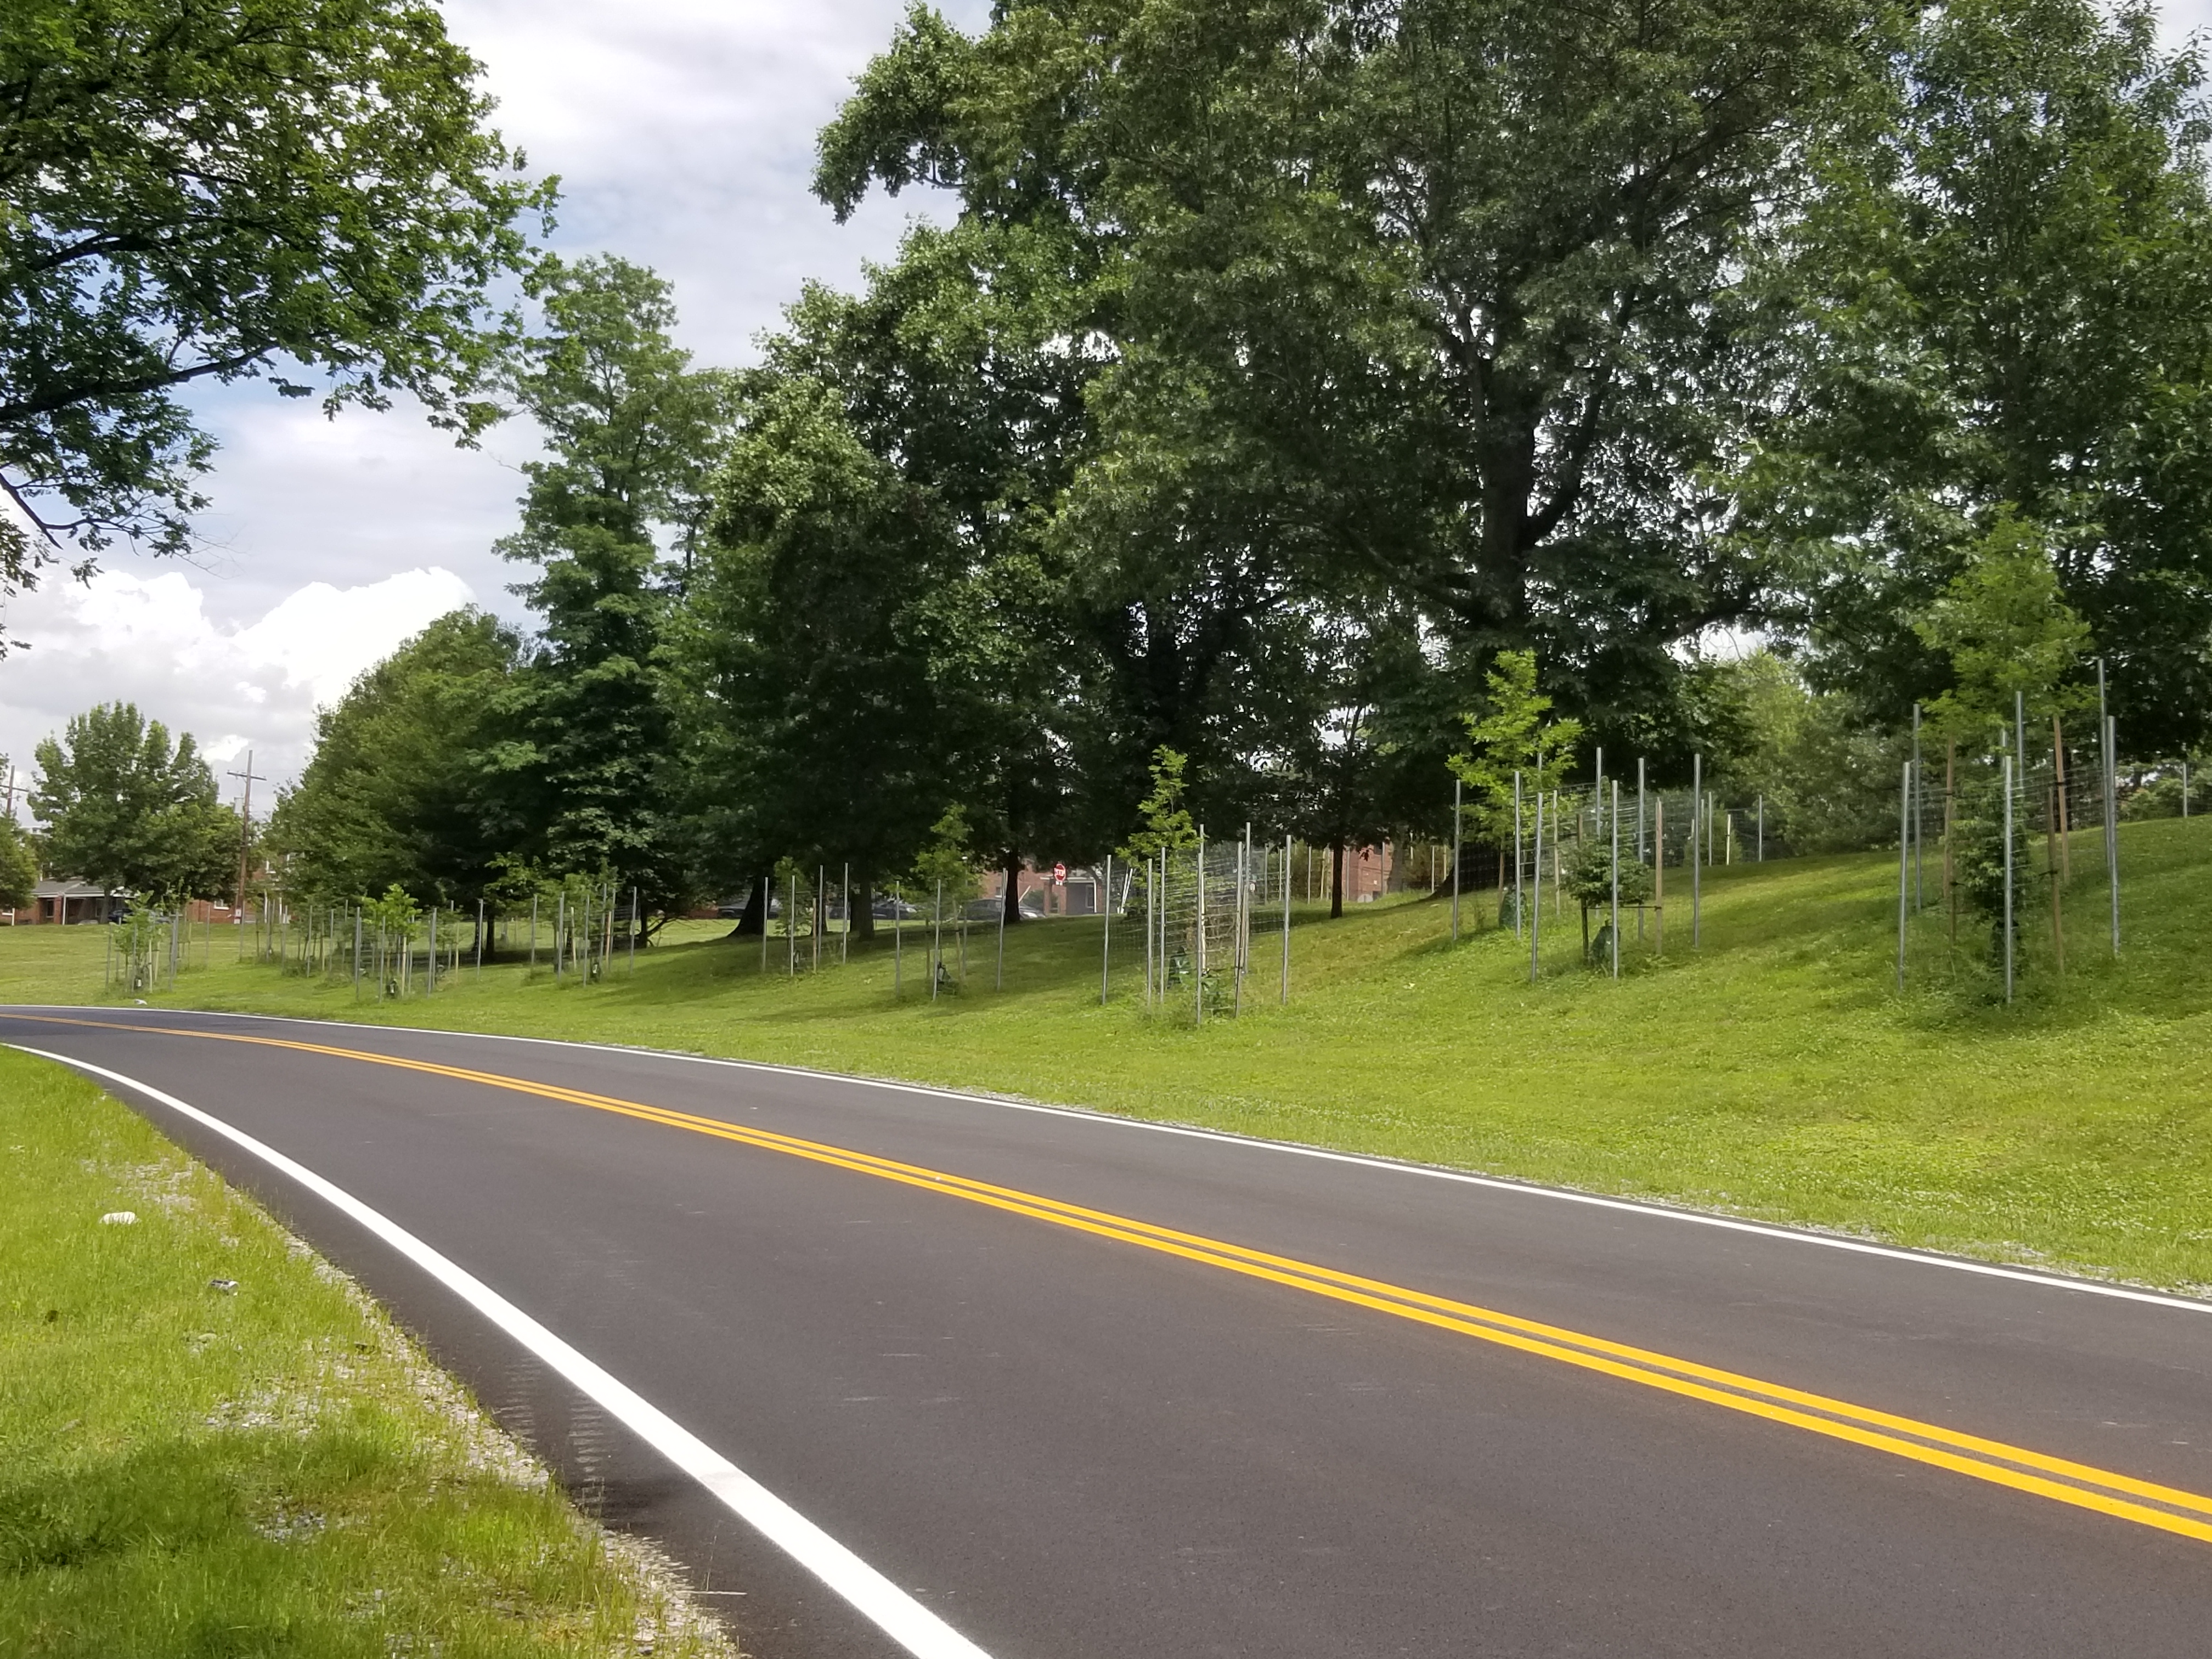 Freshly paved and painted asphalt road with newly planted trees nearby